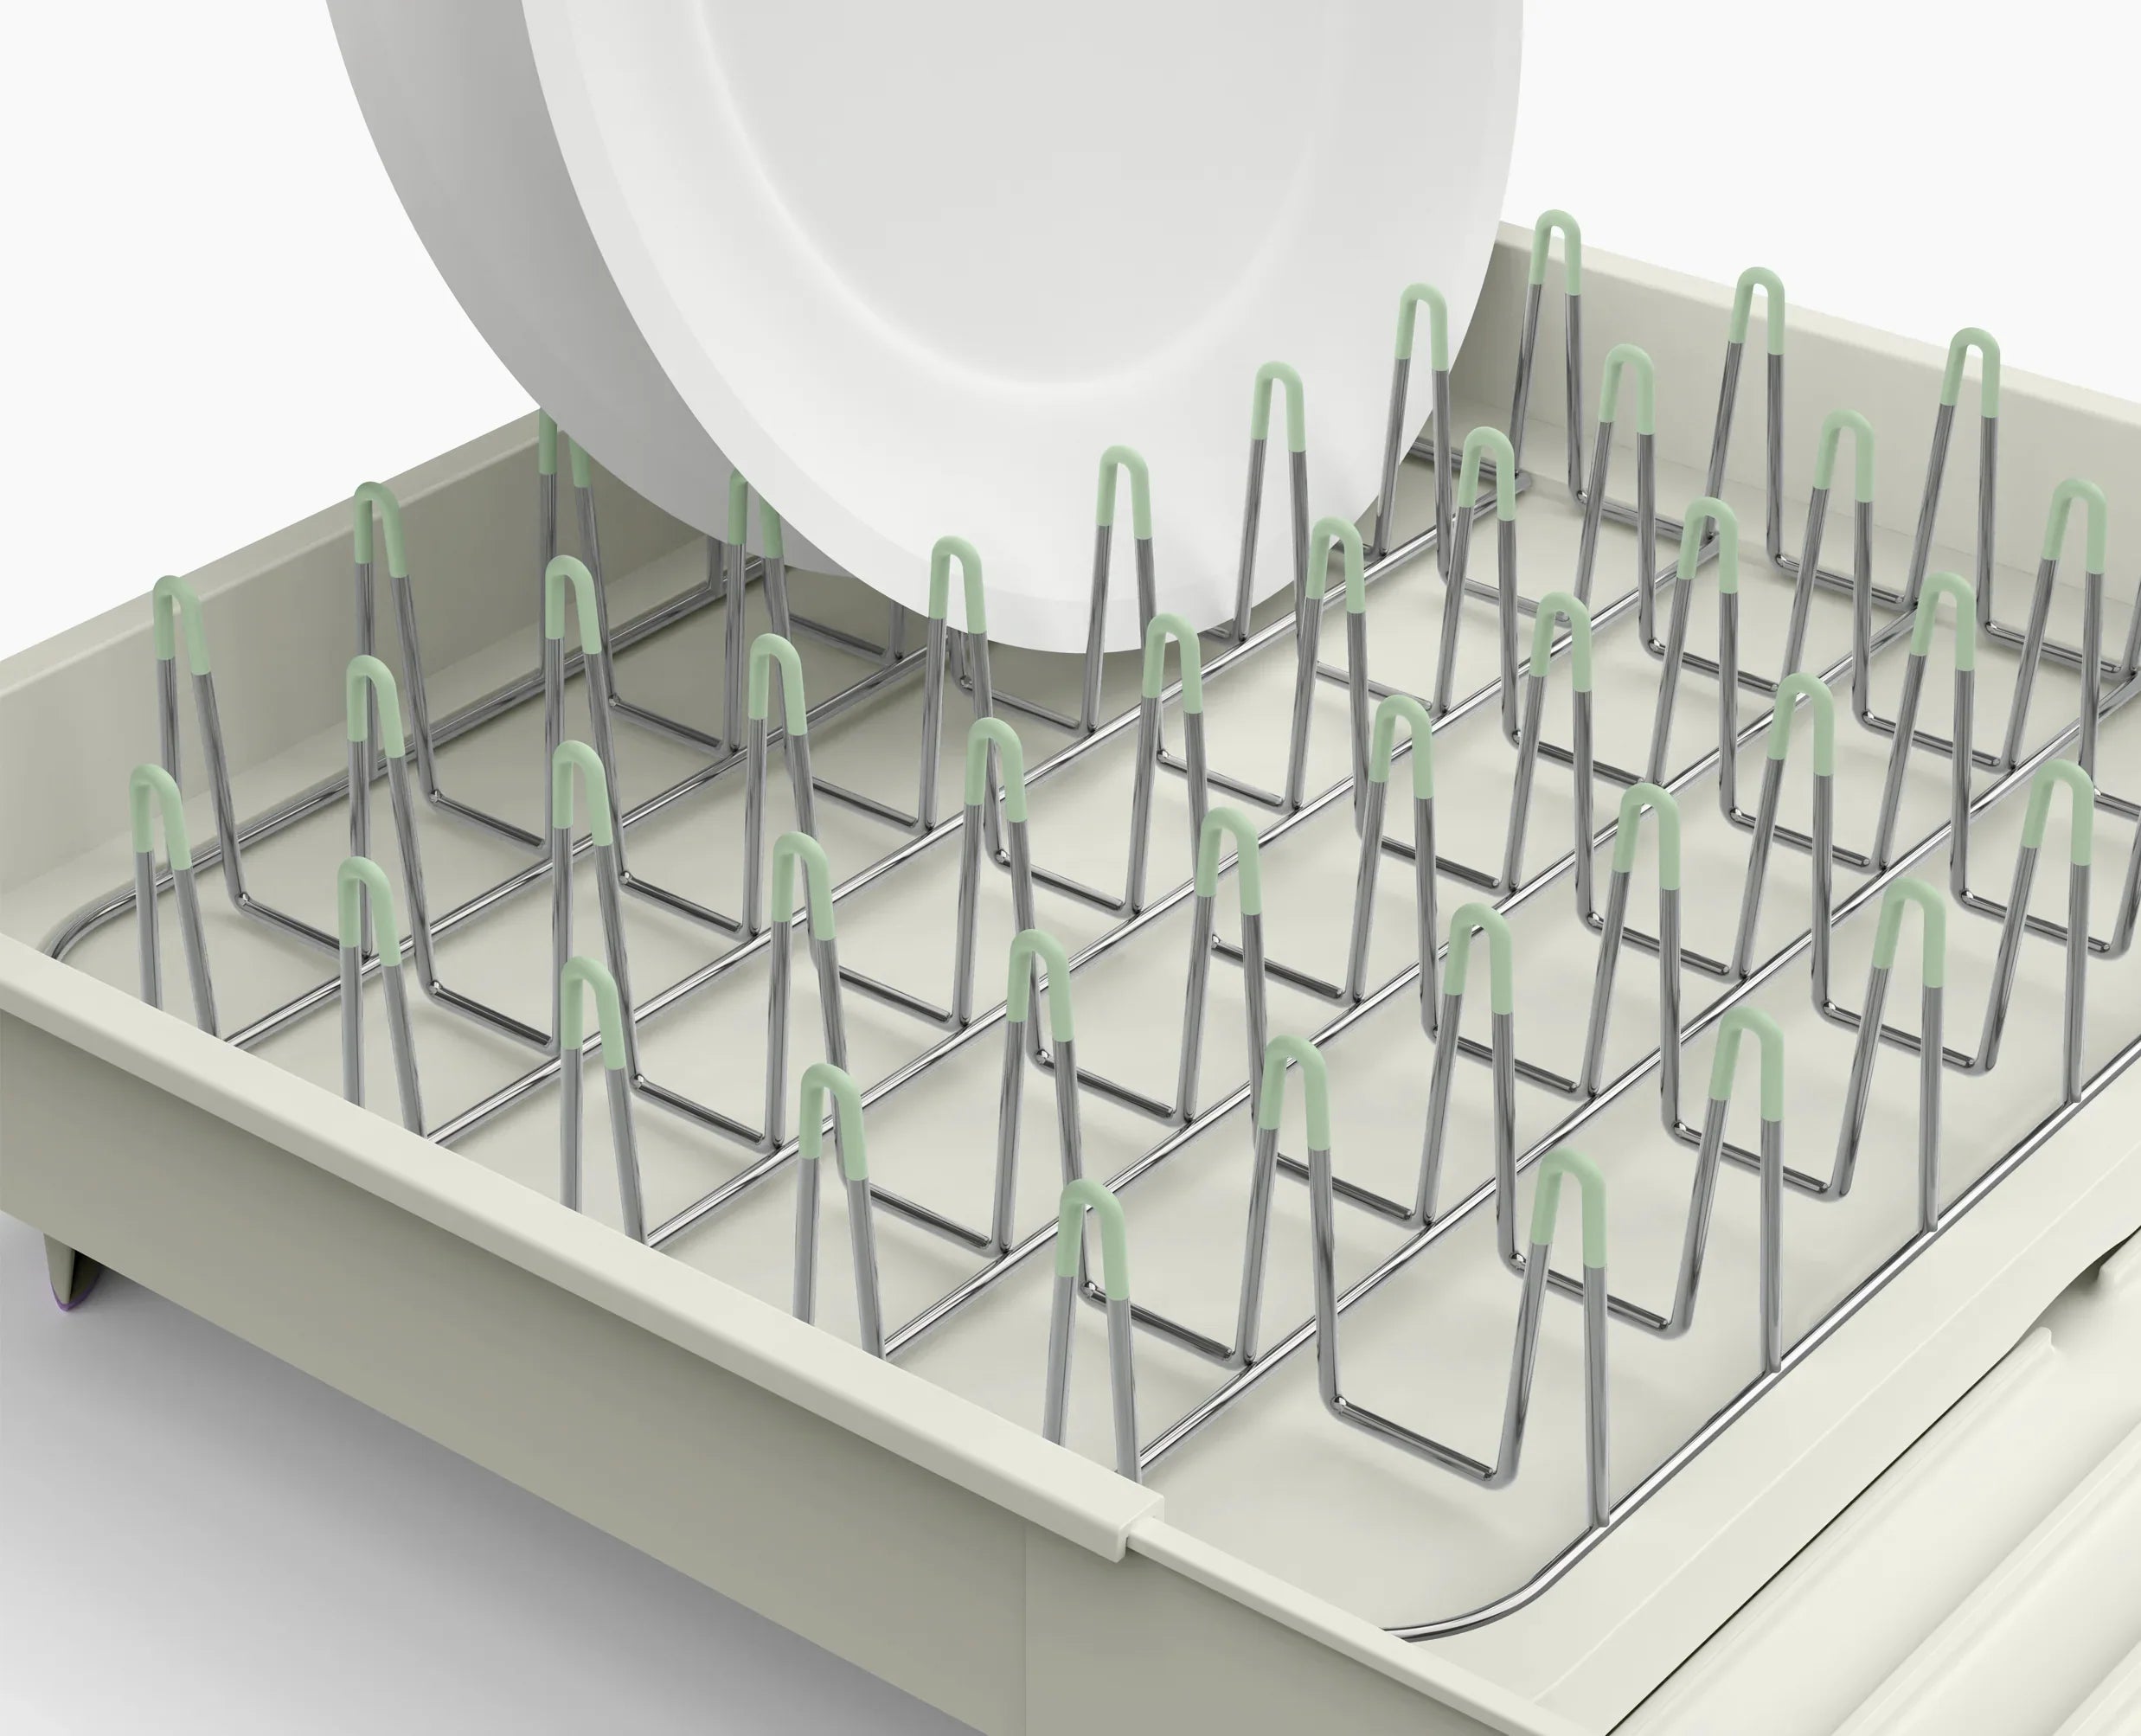 Extend™ Expandable Dish Drainer - Stone-Green